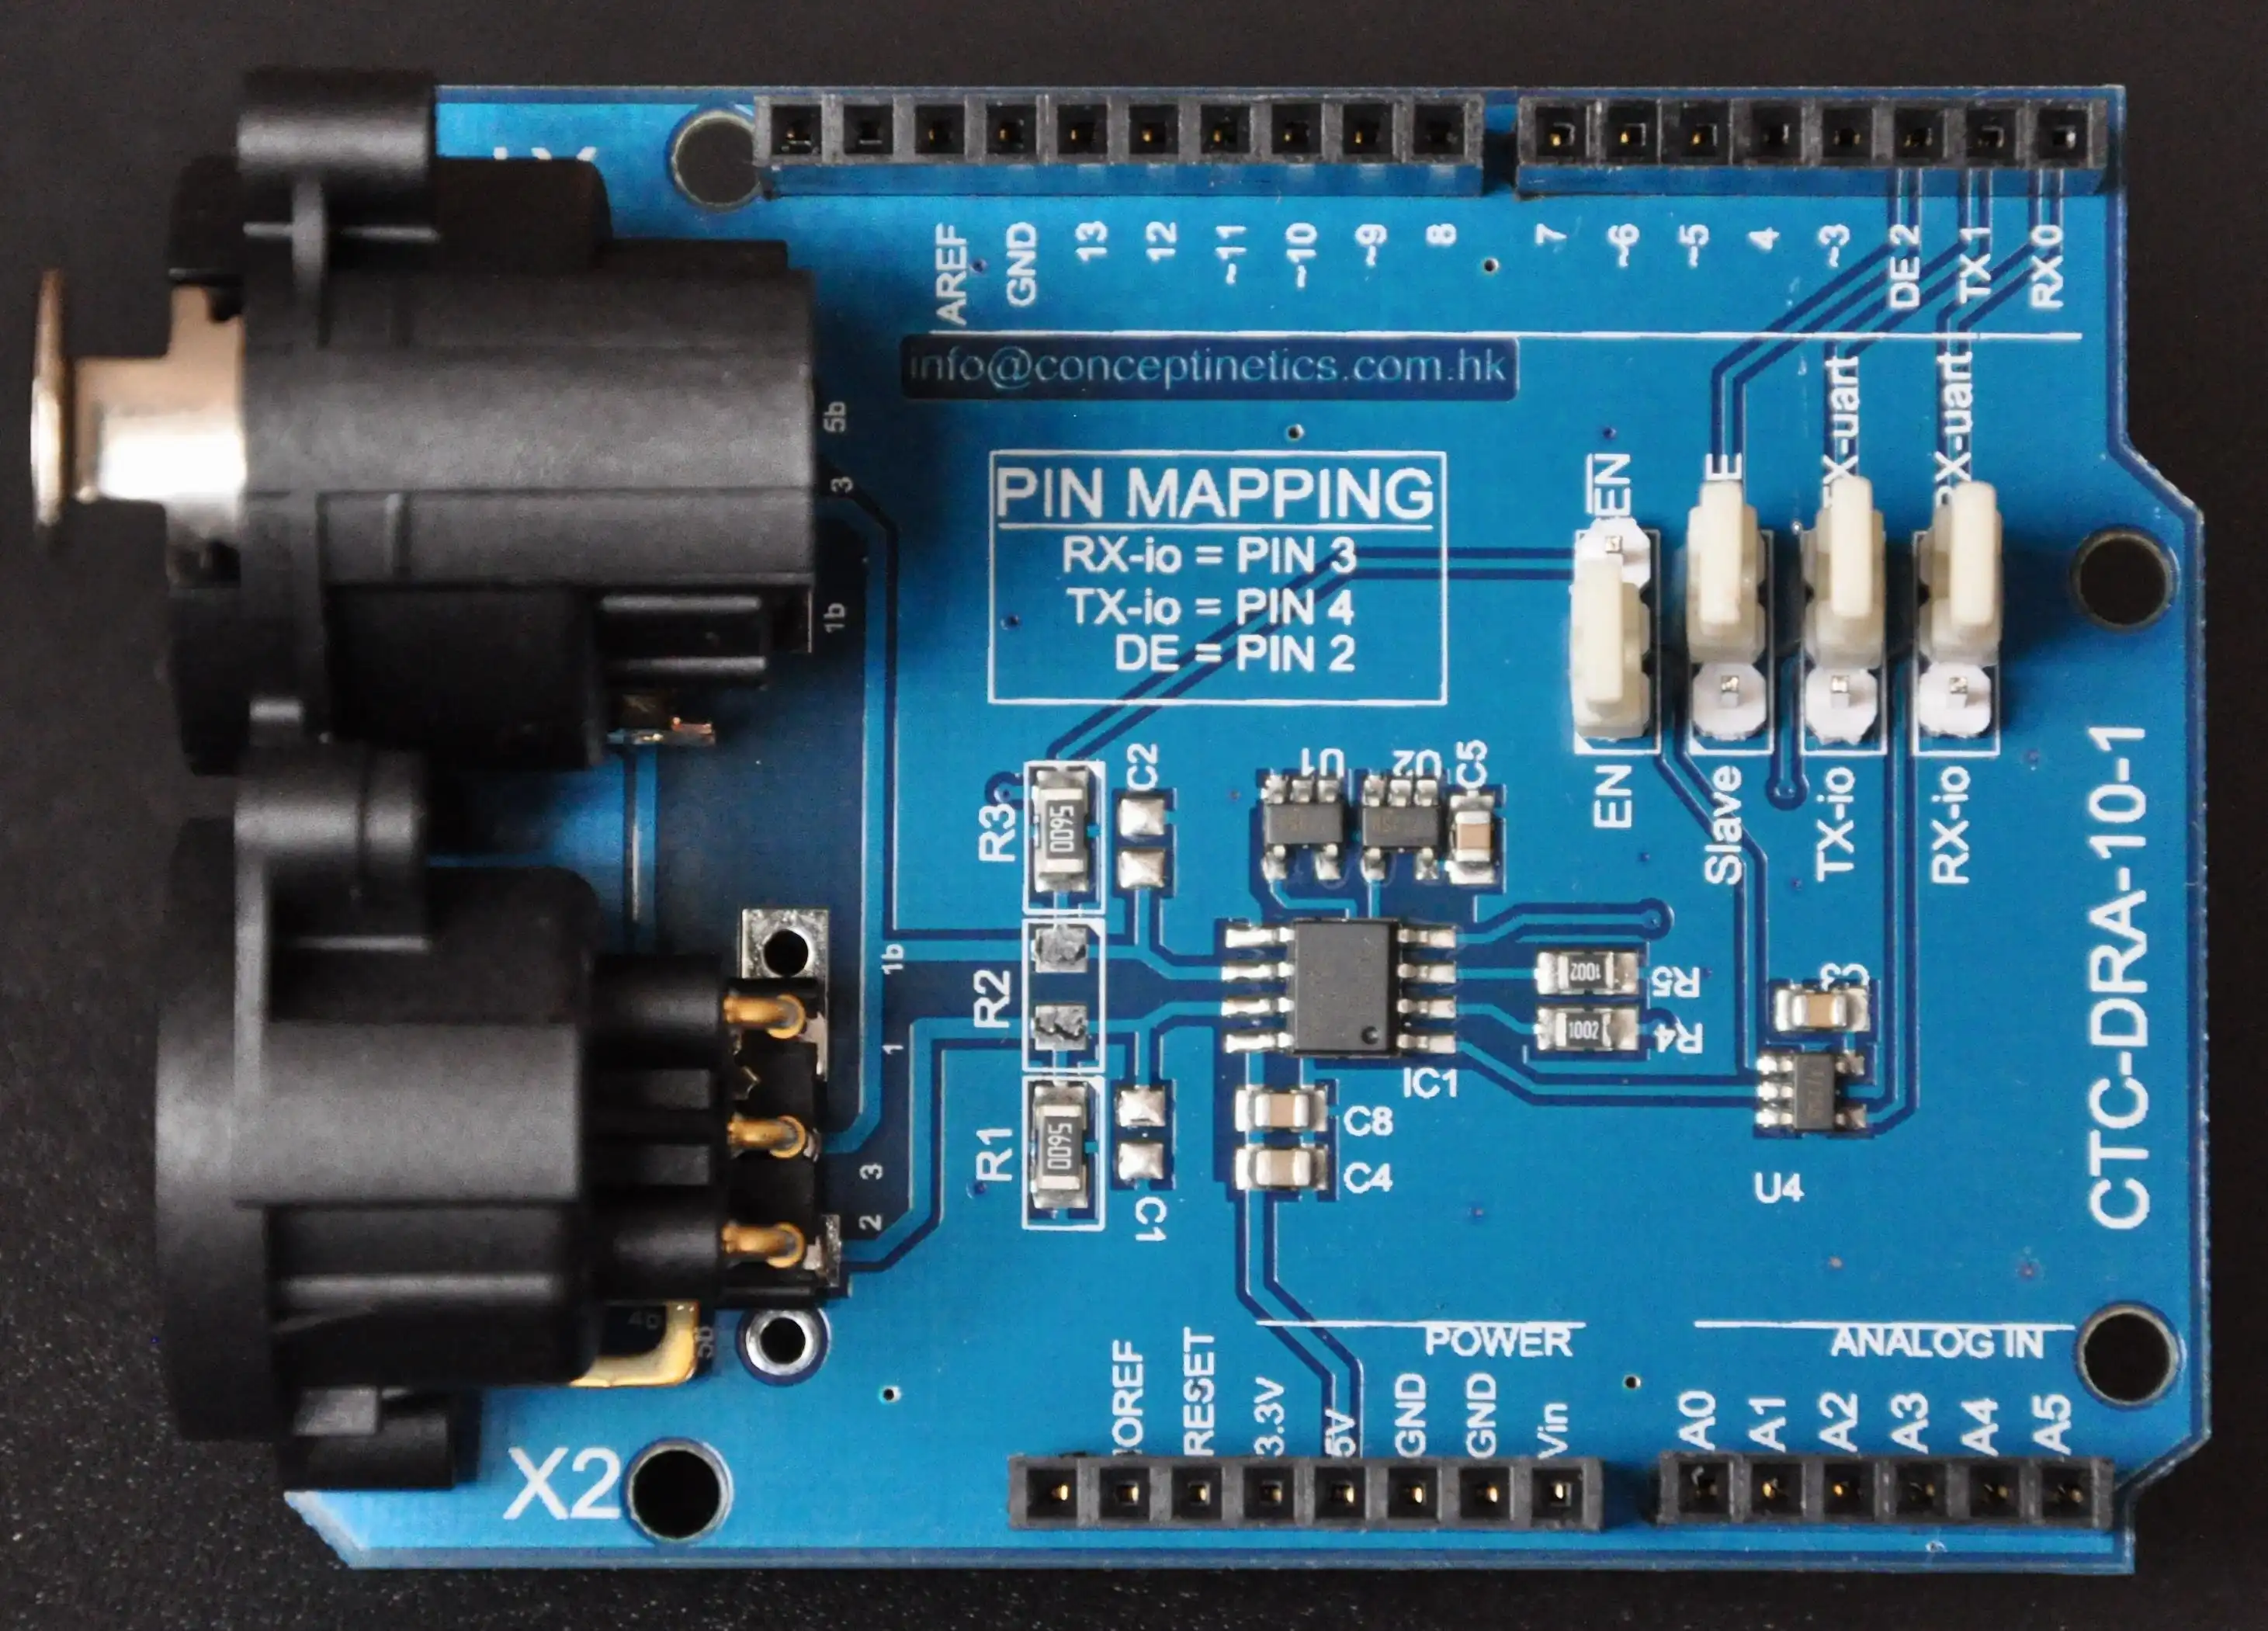 Download web tool or web app DMX Library for Arduino